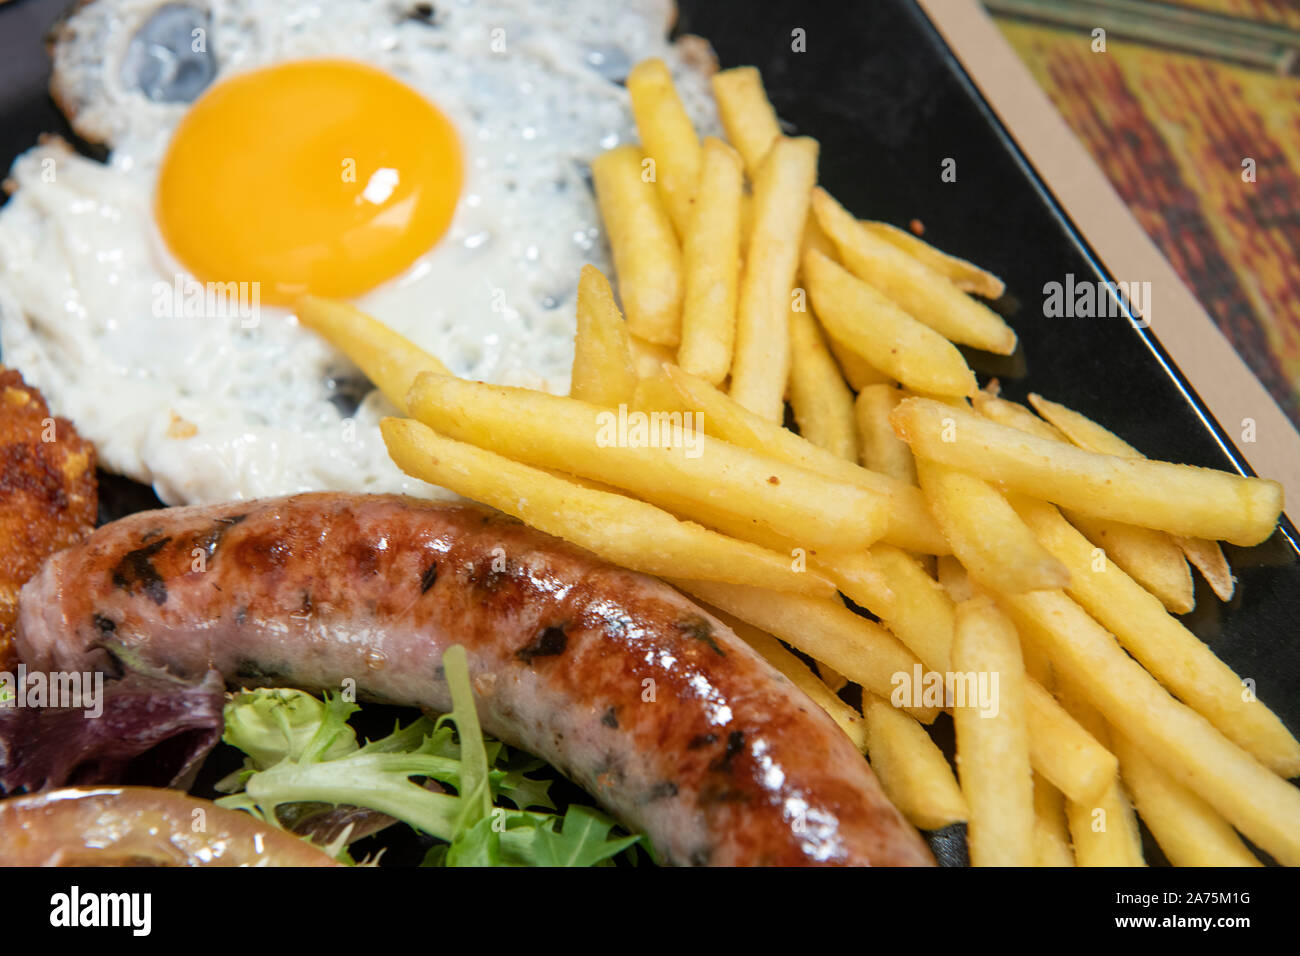 Mixed dish in a resturant Stock Photo